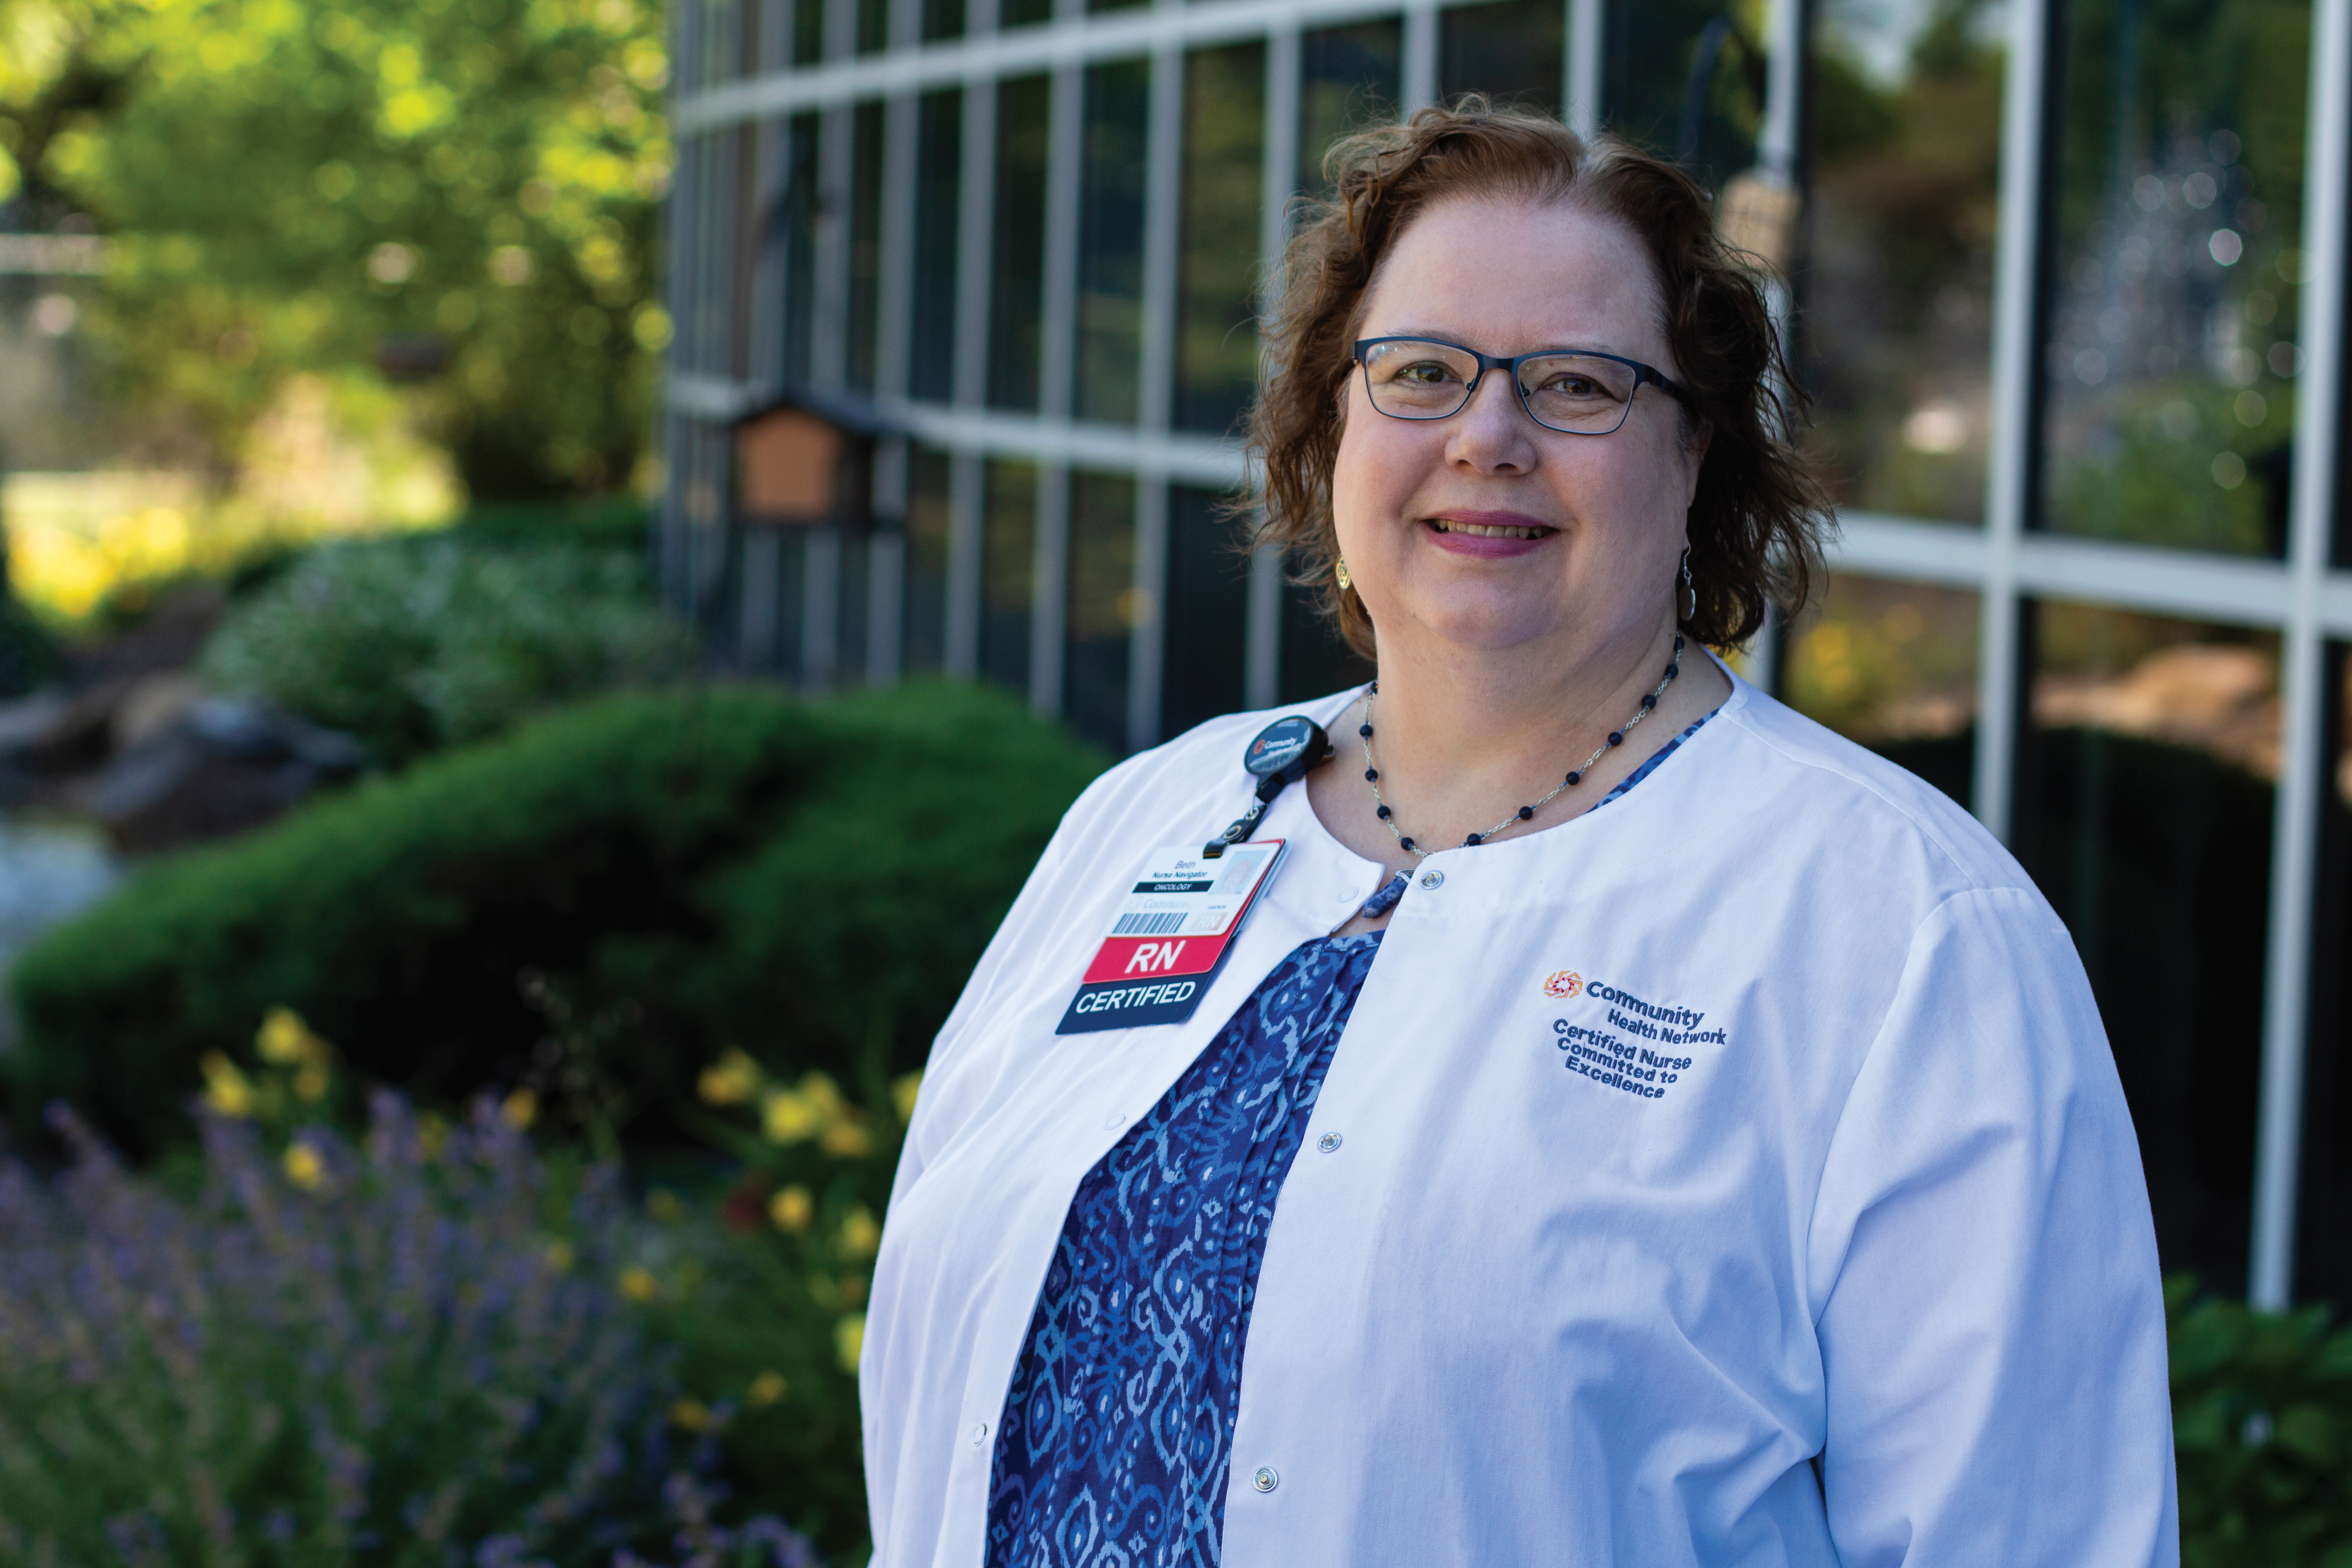 ONS member Beth Staker, BSN, RN, CBCN®, ONN-CG, a nurse navigator for Community Cancer Center South in Indianapolis, IN